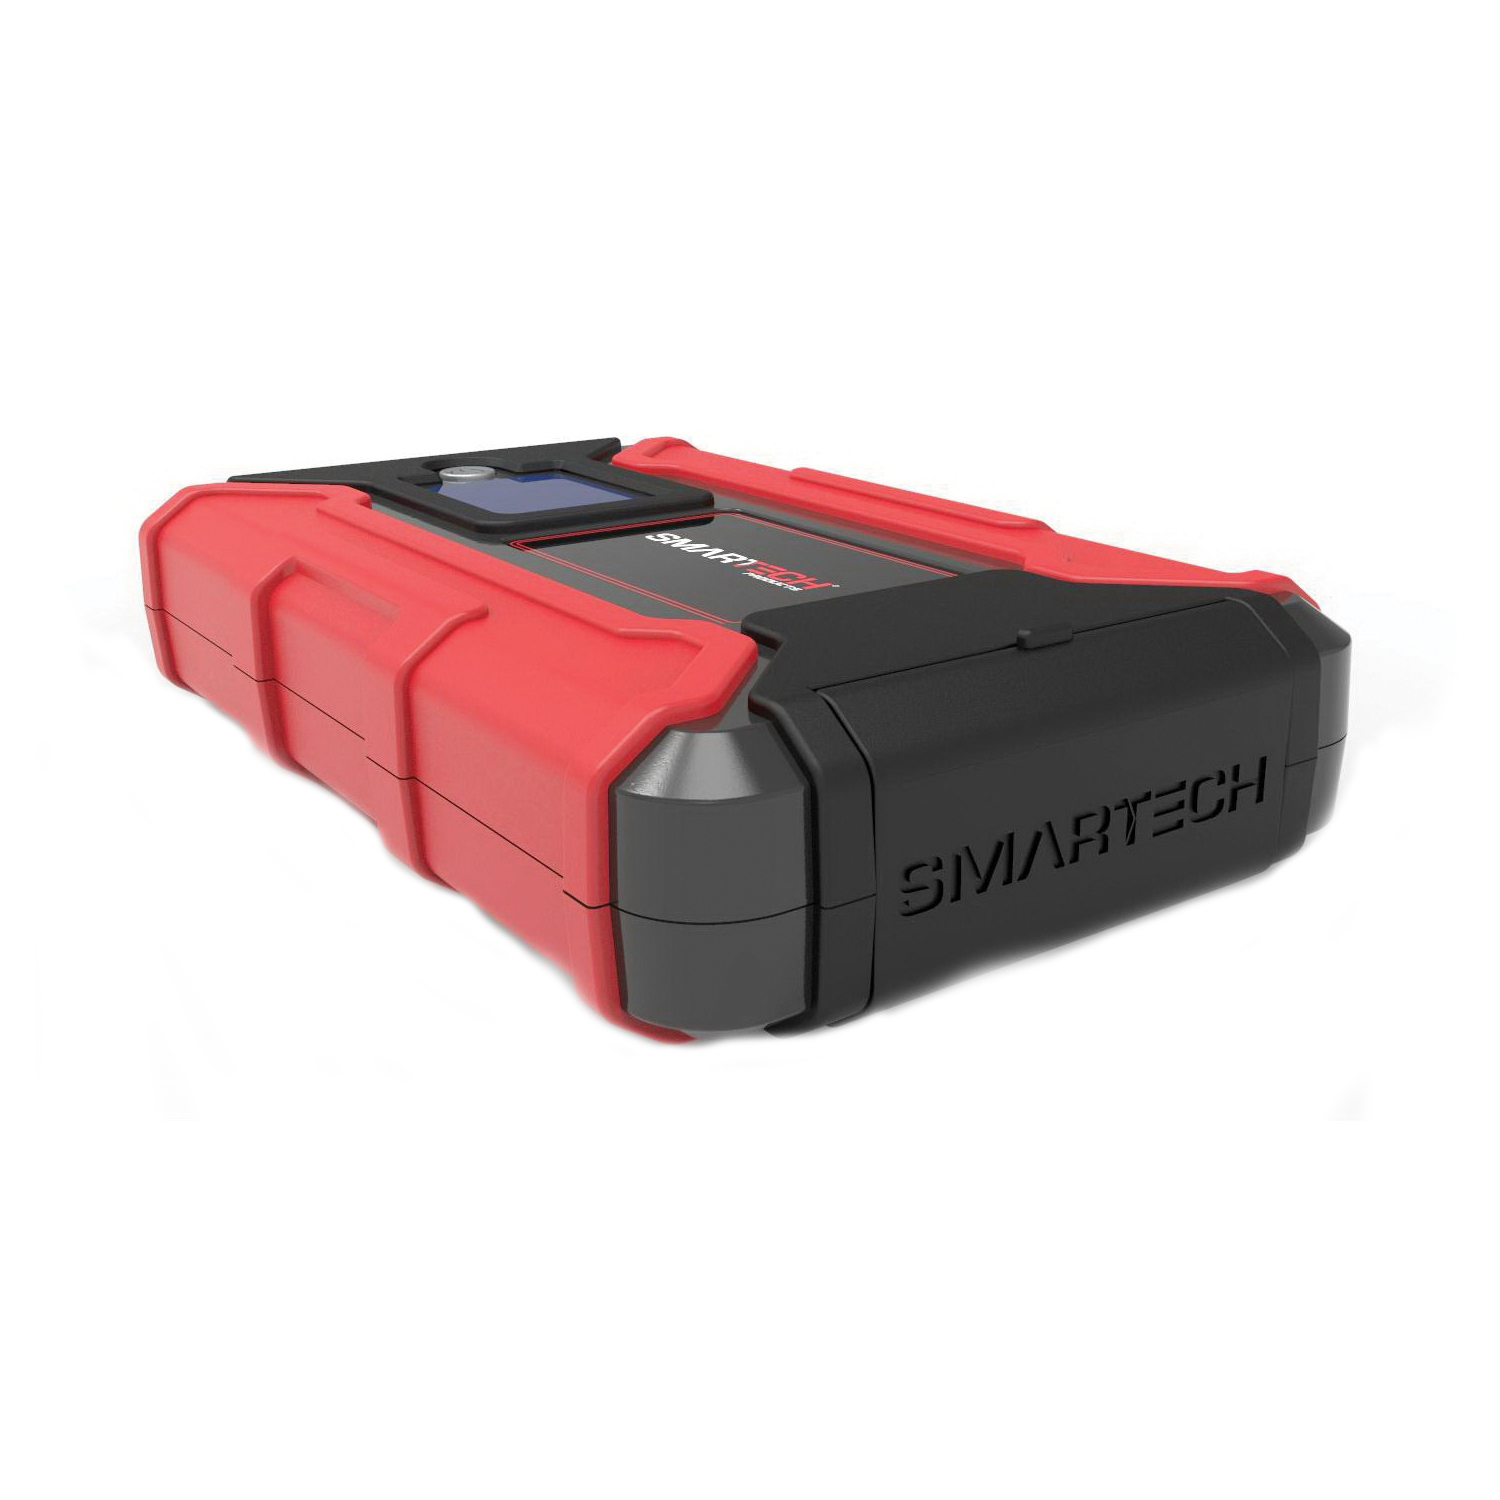 SMARTECH JS-15000N Vehicle Jump Starter and Power Bank, Lithium-Ion Polymer Battery - 3